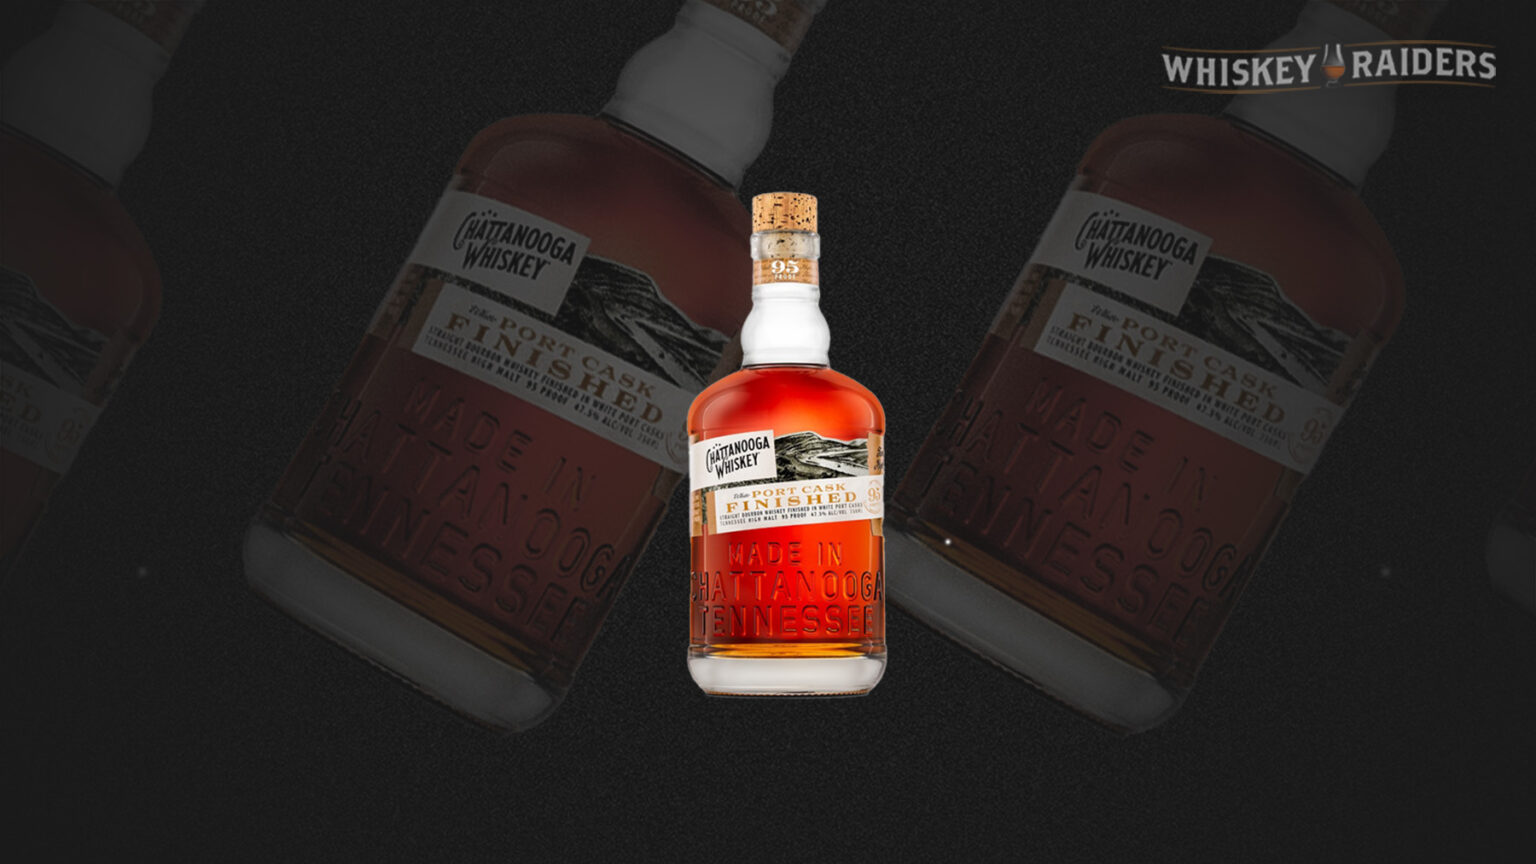 Whiskey Raiders: Chattanooga Whiskey Continues Barrel Finishing Series With an Expression Celebrating Portugal’s Terroir